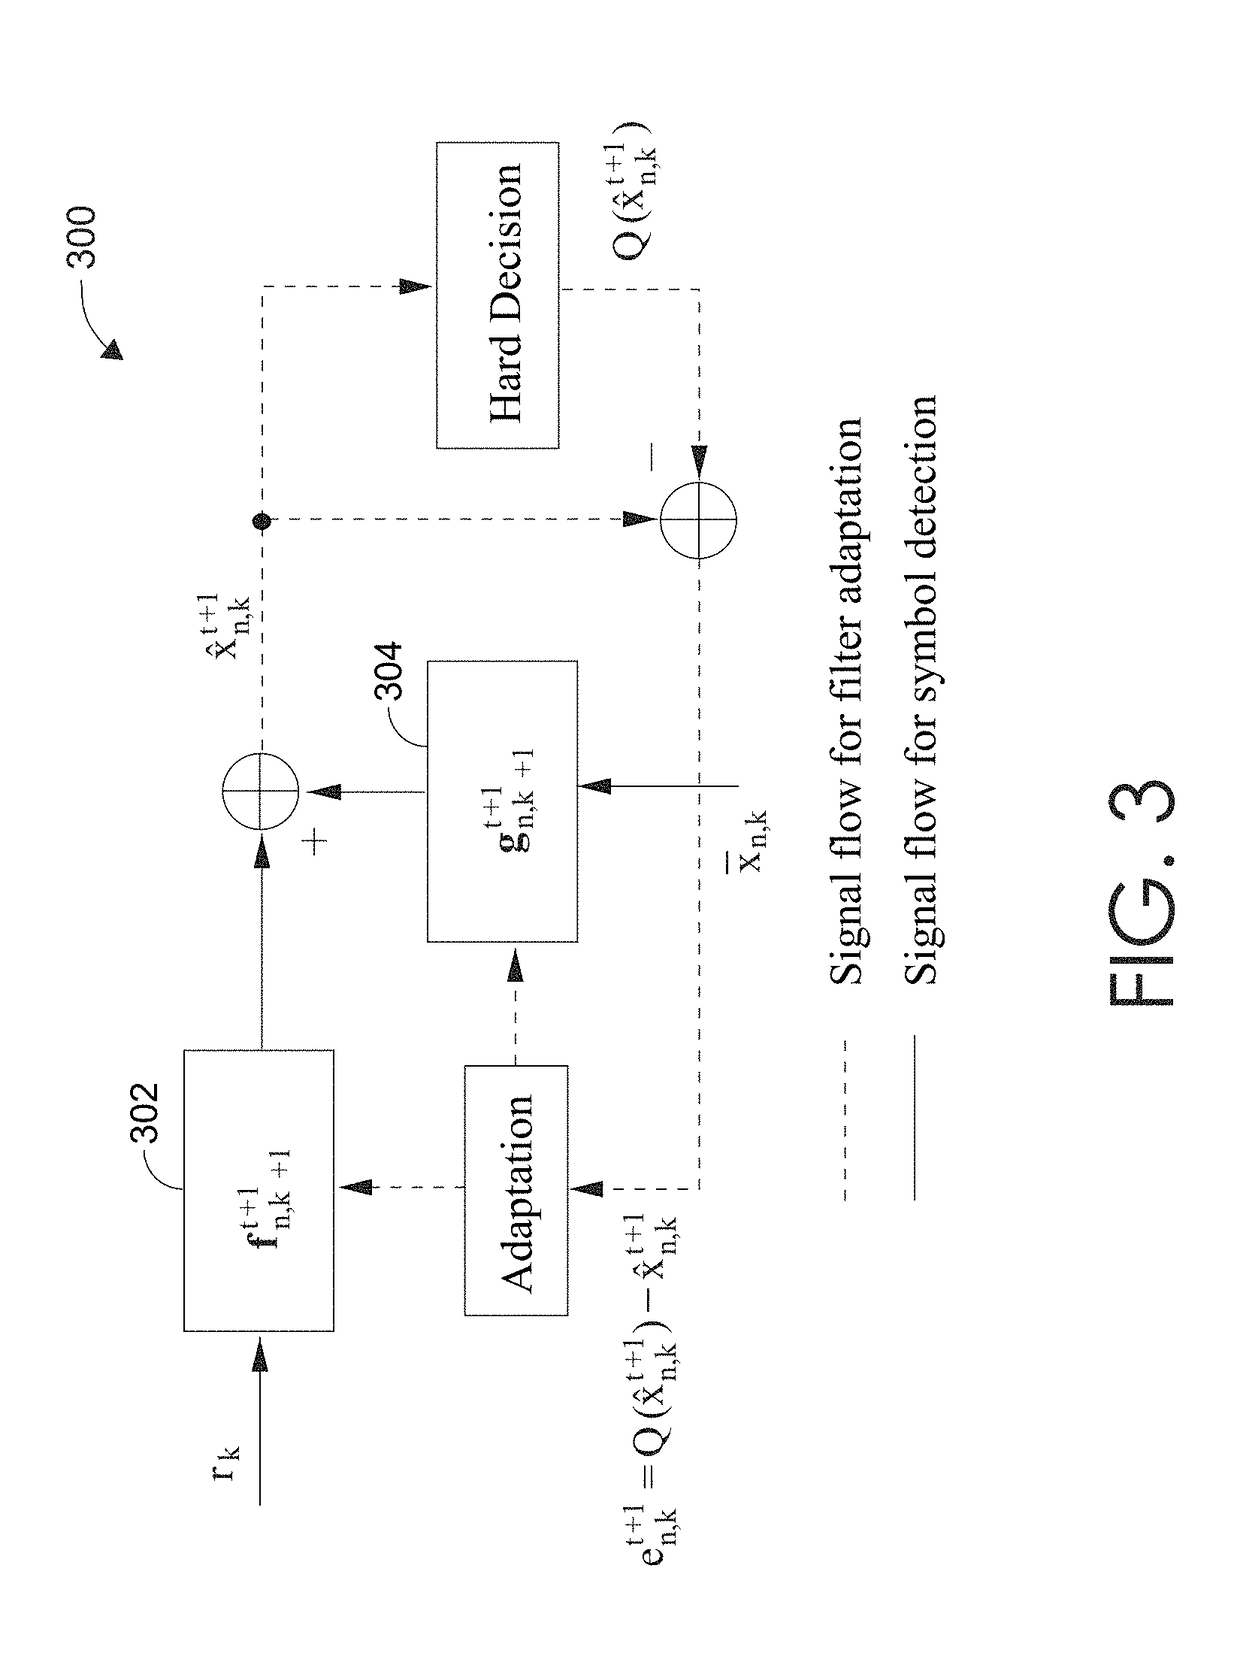 Turbo receivers for multiple-input multiple-output underwater acoustic communications